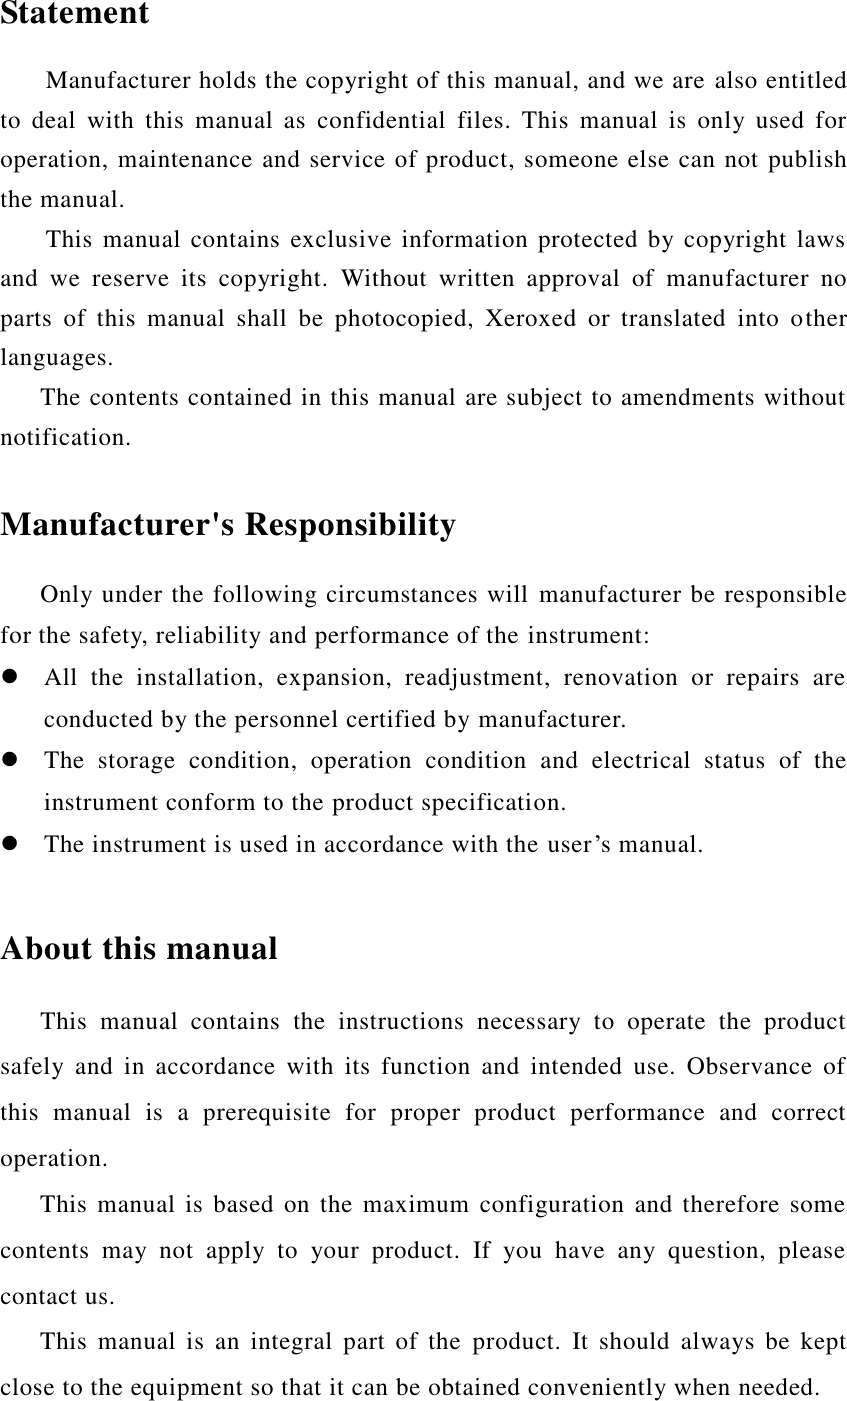  Statement Manufacturer holds the copyright of this manual, and we are also entitled to  deal  with  this  manual  as  confidential  files.  This  manual  is  only  used  for operation, maintenance and service of product, someone else can not publish the manual. This manual contains  exclusive information protected by  copyright laws and  we  reserve  its  copyright.  Without  written  approval  of  manufacturer  no parts  of  this  manual  shall  be  photocopied,  Xeroxed  or  translated  into  other languages. The contents contained in this manual are subject to amendments without notification.  Manufacturer&apos;s Responsibility Only under the following circumstances will manufacturer be responsible for the safety, reliability and performance of the instrument:  All  the  installation,  expansion,  readjustment,  renovation  or  repairs  are conducted by the personnel certified by manufacturer.  The  storage  condition,  operation  condition  and  electrical  status  of  the instrument conform to the product specification.  The instrument is used in accordance with the user’s manual.  About this manual This  manual  contains  the  instructions  necessary  to  operate  the  product safely  and  in  accordance  with  its  function  and  intended  use.  Observance  of this  manual  is  a  prerequisite  for  proper  product  performance  and  correct operation.    This manual is based on the maximum configuration and therefore some contents  may  not  apply  to  your  product.  If  you  have  any  question,  please contact us.    This  manual  is  an  integral part  of  the  product.  It  should  always  be  kept close to the equipment so that it can be obtained conveniently when needed. 